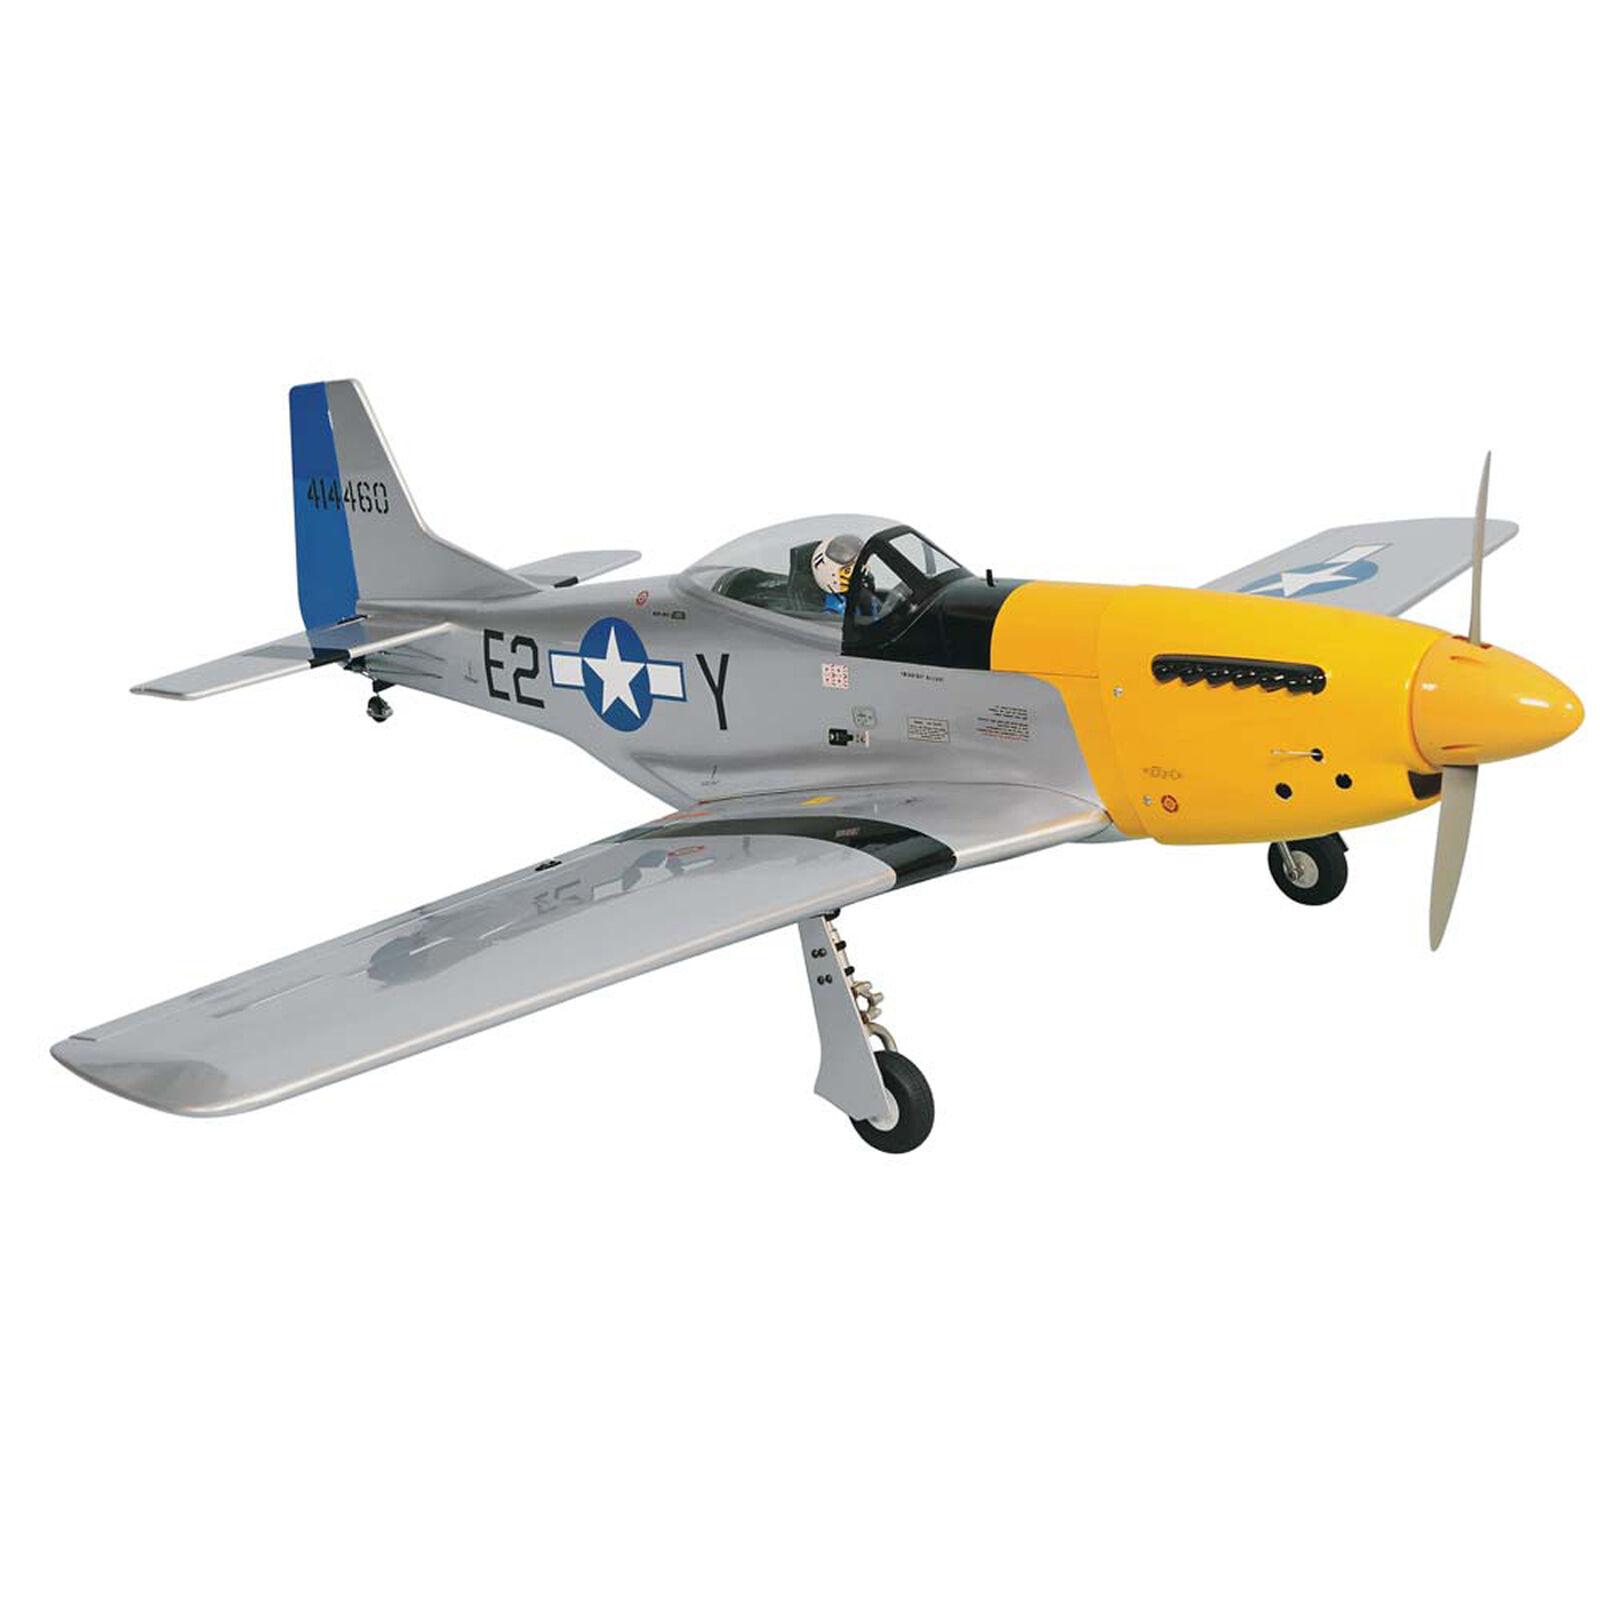 Mustang Rc Plane: Master the Mustang RC Plane and Experience Thrilling Flights!